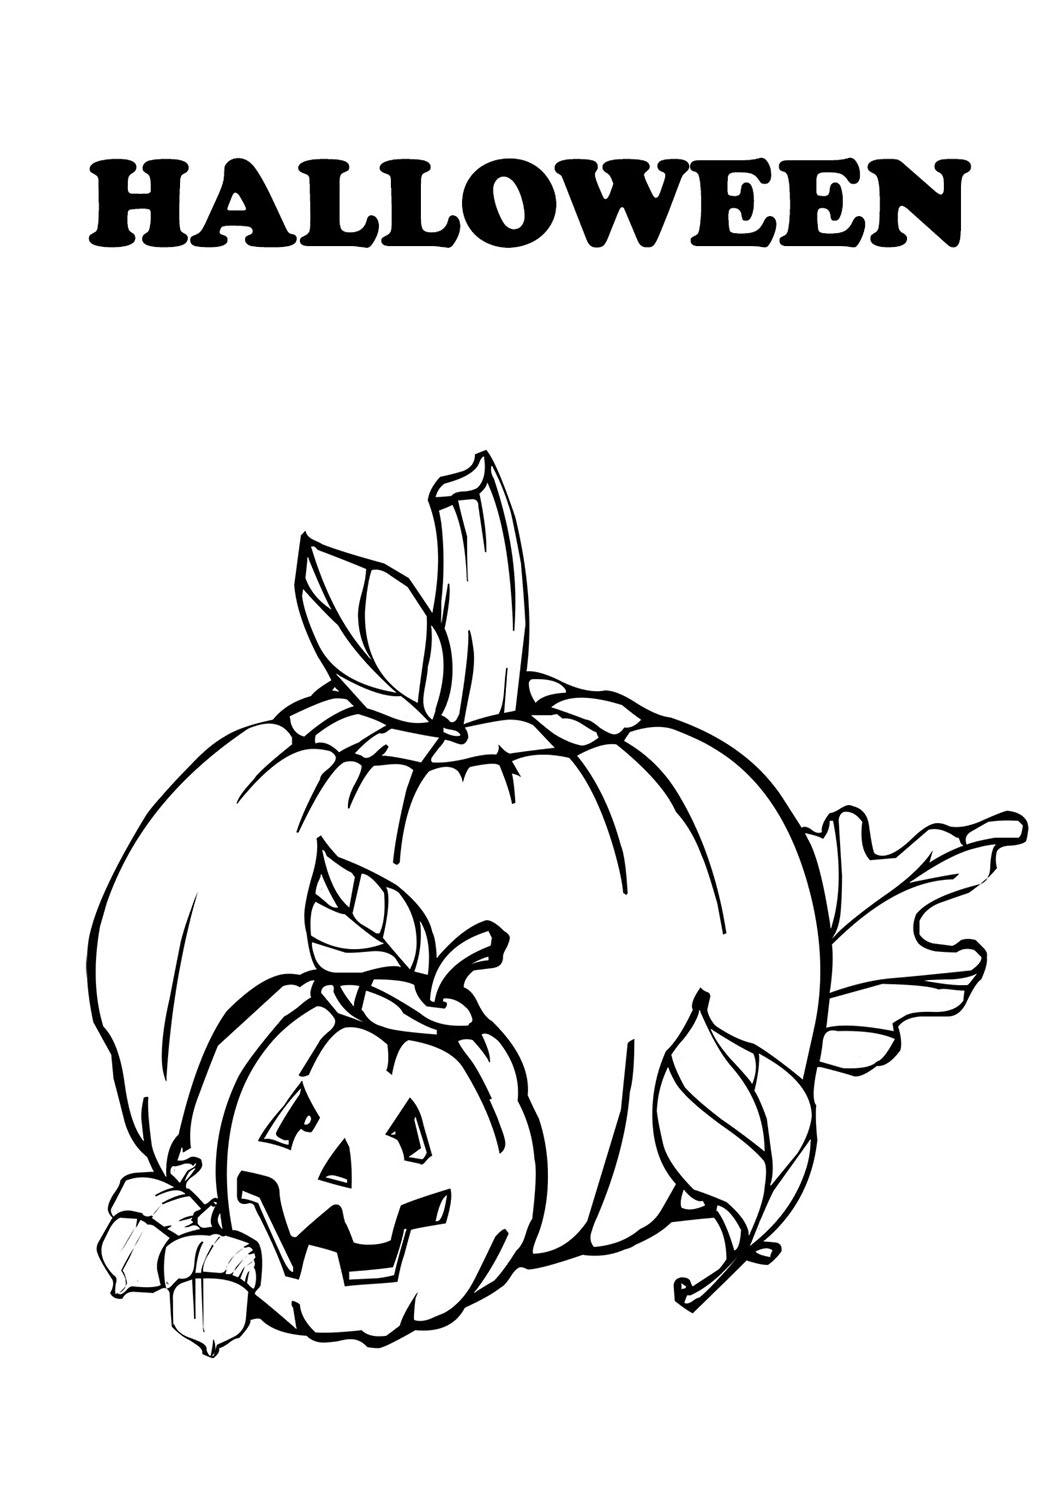 coloring page with carved pumpkins